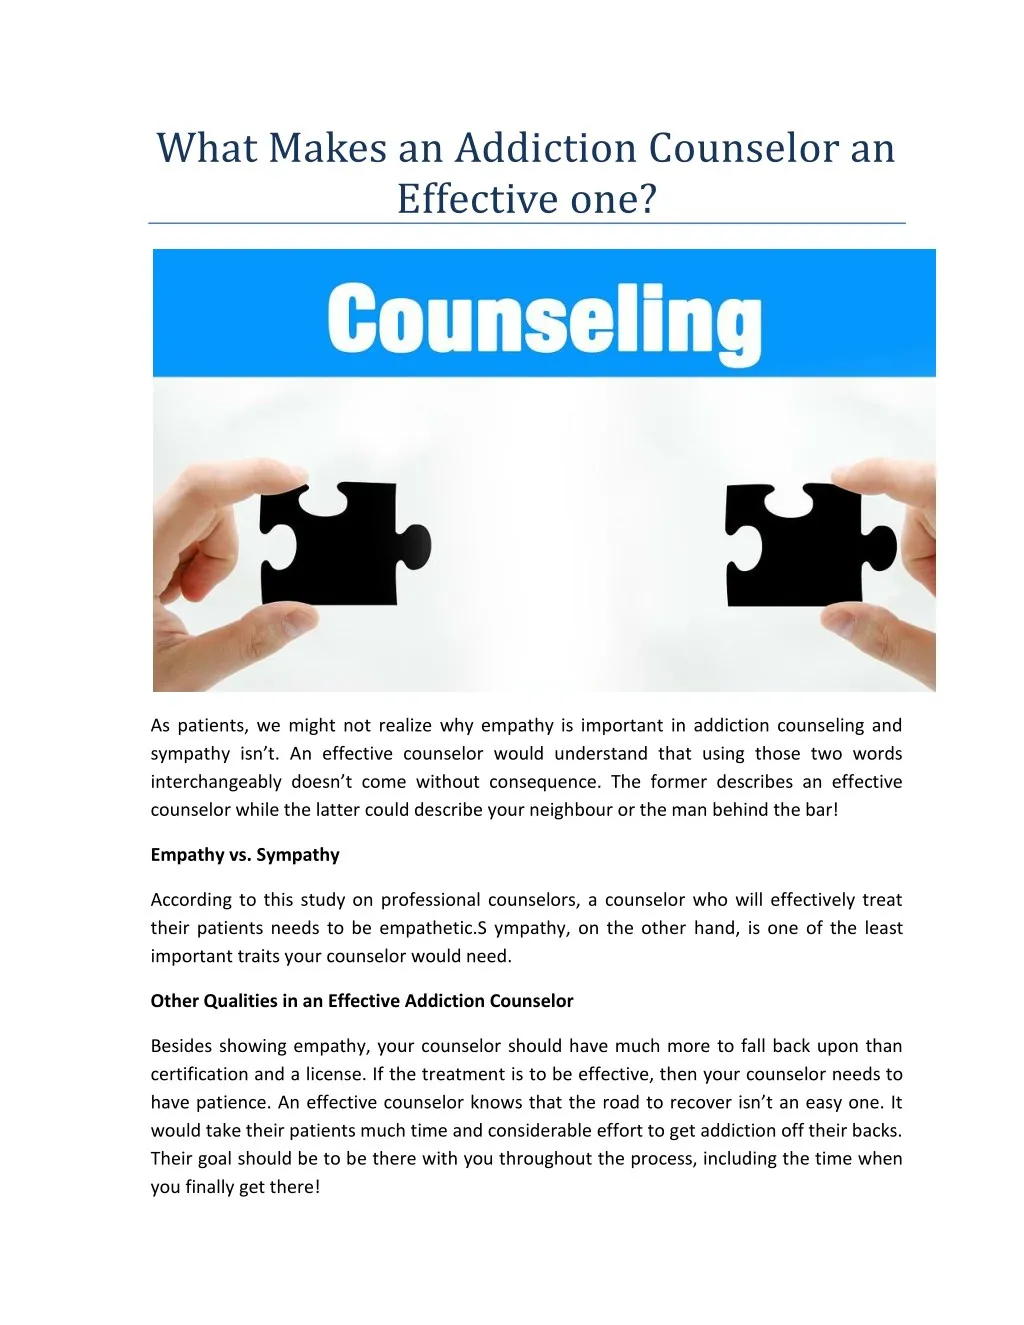 what makes an addiction counselor an effective one